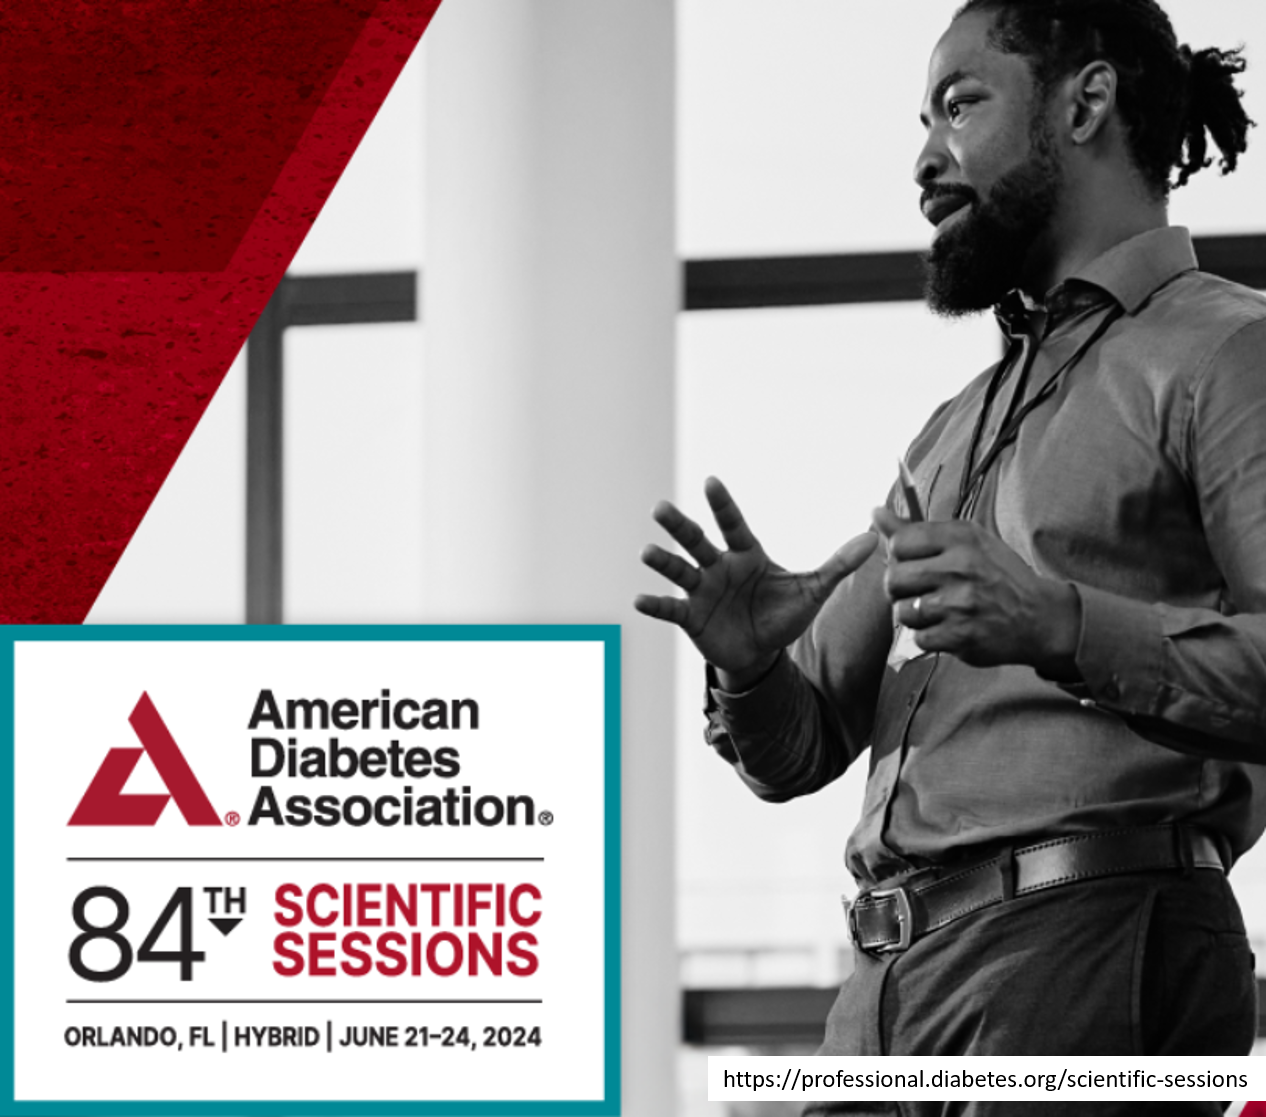 CureDiab at the Scientific Session of American Diabetes Association